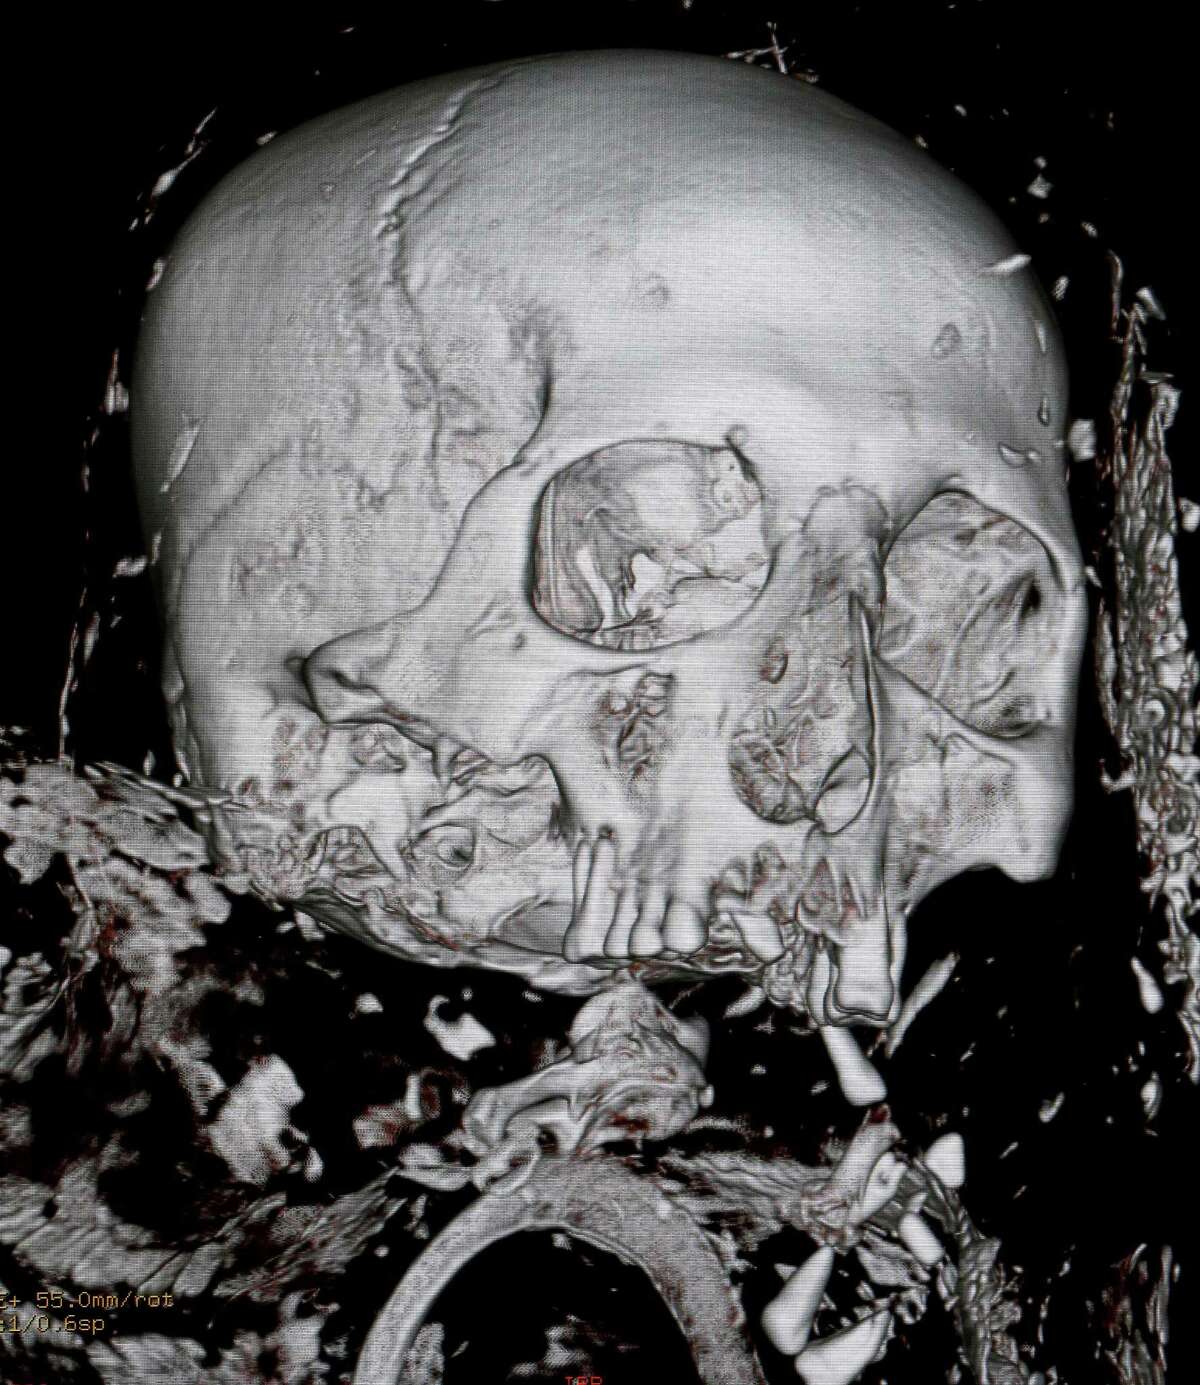 In this Friday, Feb. 1, 2013 photo, a three-dimensional image of a CT scan from a 4,000-year-old Egyptian mummy named Tjeby, from the Virginia Museum of Fine Arts, is shown at the HCA Virginia Imaging center in Richmond, Va. Experts hope the scan will help piece together more information about the mummy itself, as well as a better understanding into the early history of the mummification process. (AP Photo/Steve Helber)